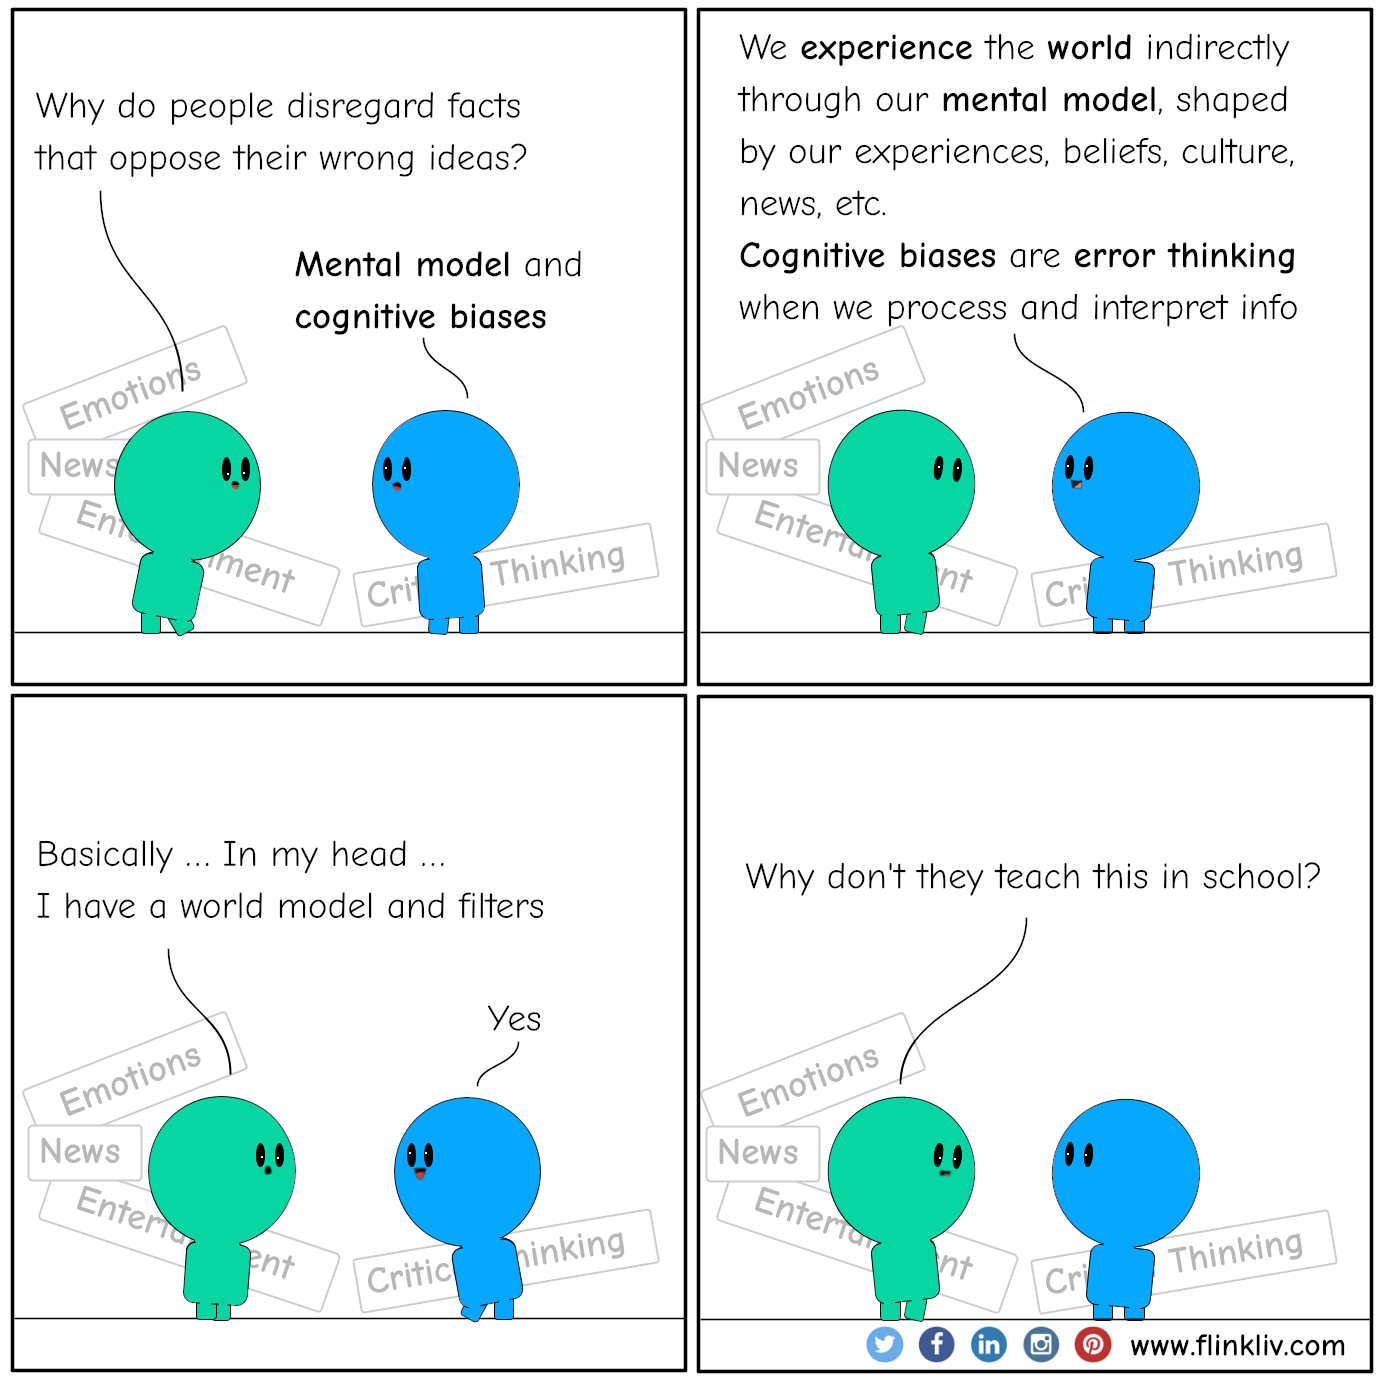 Conversation between A and B about Cognitive biases vs systems thinking. 
            A: Why do people disregard facts that oppose their wrong ideas?
            Because of the mental model and cognitive biases.
            B: We experience the world indirectly through our mental model, shaped by our experiences, beliefs, culture, news, etc.
            Cognitive biases are error thinking when we process and interpret info.
            A:Basically, in my head, I have a world model and filters
            B:Yes,
            A:I never heard about that at school.             